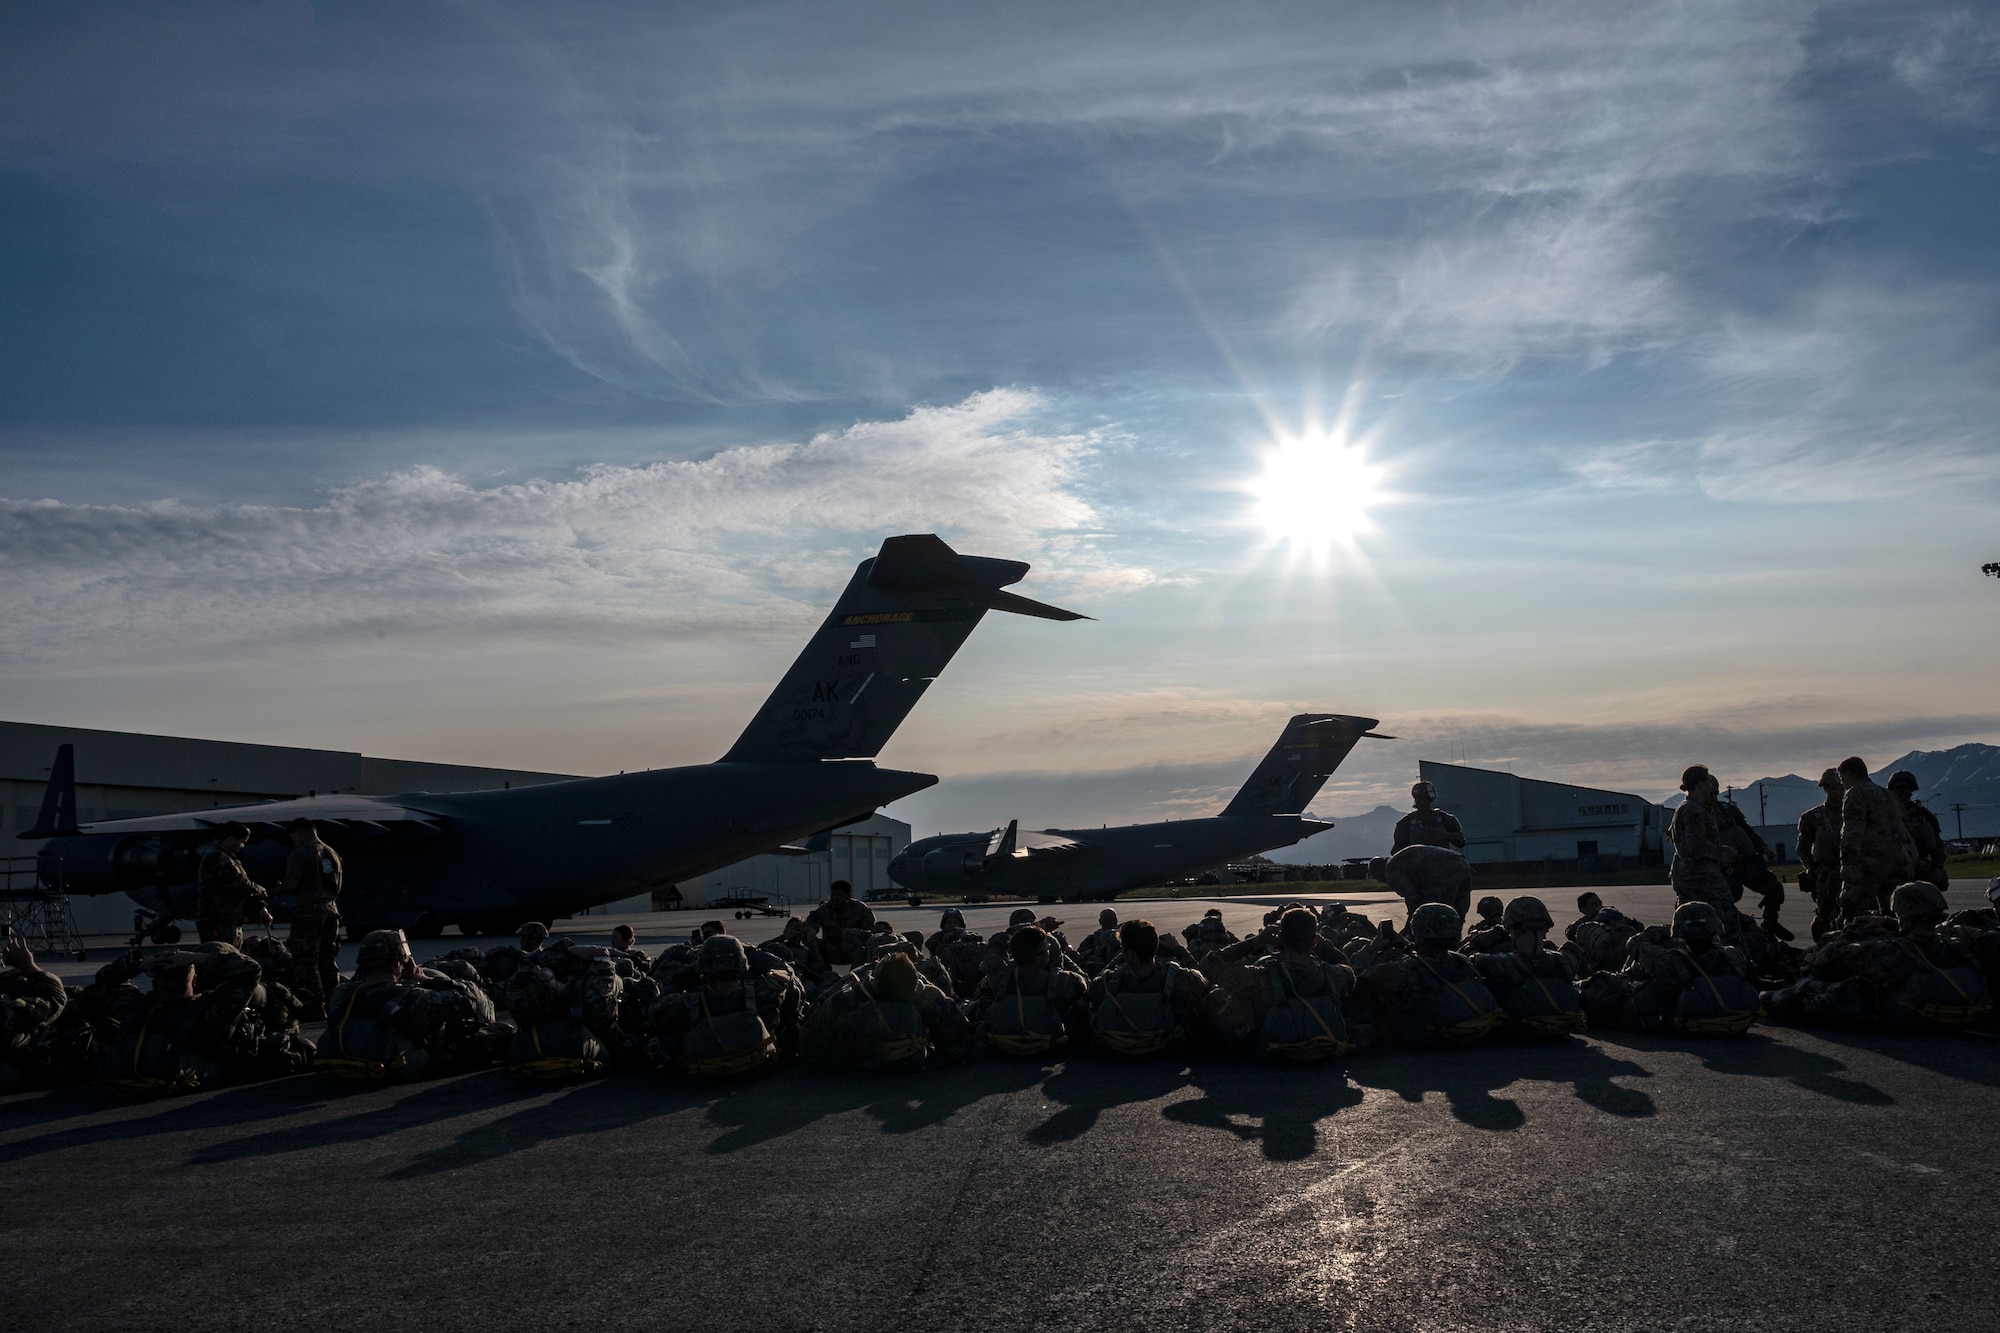 U.S. Army Paratroopers, Air Force joint terminal attack controller and Special Tactic Operators wait on the tarmac before boarding a C-17 Globemaster III from the 517th Airlift Squadron at Joint Base Elmendorf-Richardson, Alaska, June 15, 2022 during RED FLAG-Alaska 22-2. Approximately 1,600 service members from three nations participate in flying, maintaining and supporting more than 70 aircraft from over 22 units during this iteration of exercise. The Paratroopers are assigned to the 2nd Infantry Brigade Combat Team (Airborne), 11th Airborne Division, JTACs are assigned to the 3rd Air Operation Squadron both at JBER and ST operators are assigned to the 23rd Special Tactics Squadron, Hurlburt Field, Florida. (U.S. Air Force photo by Sheila deVera)